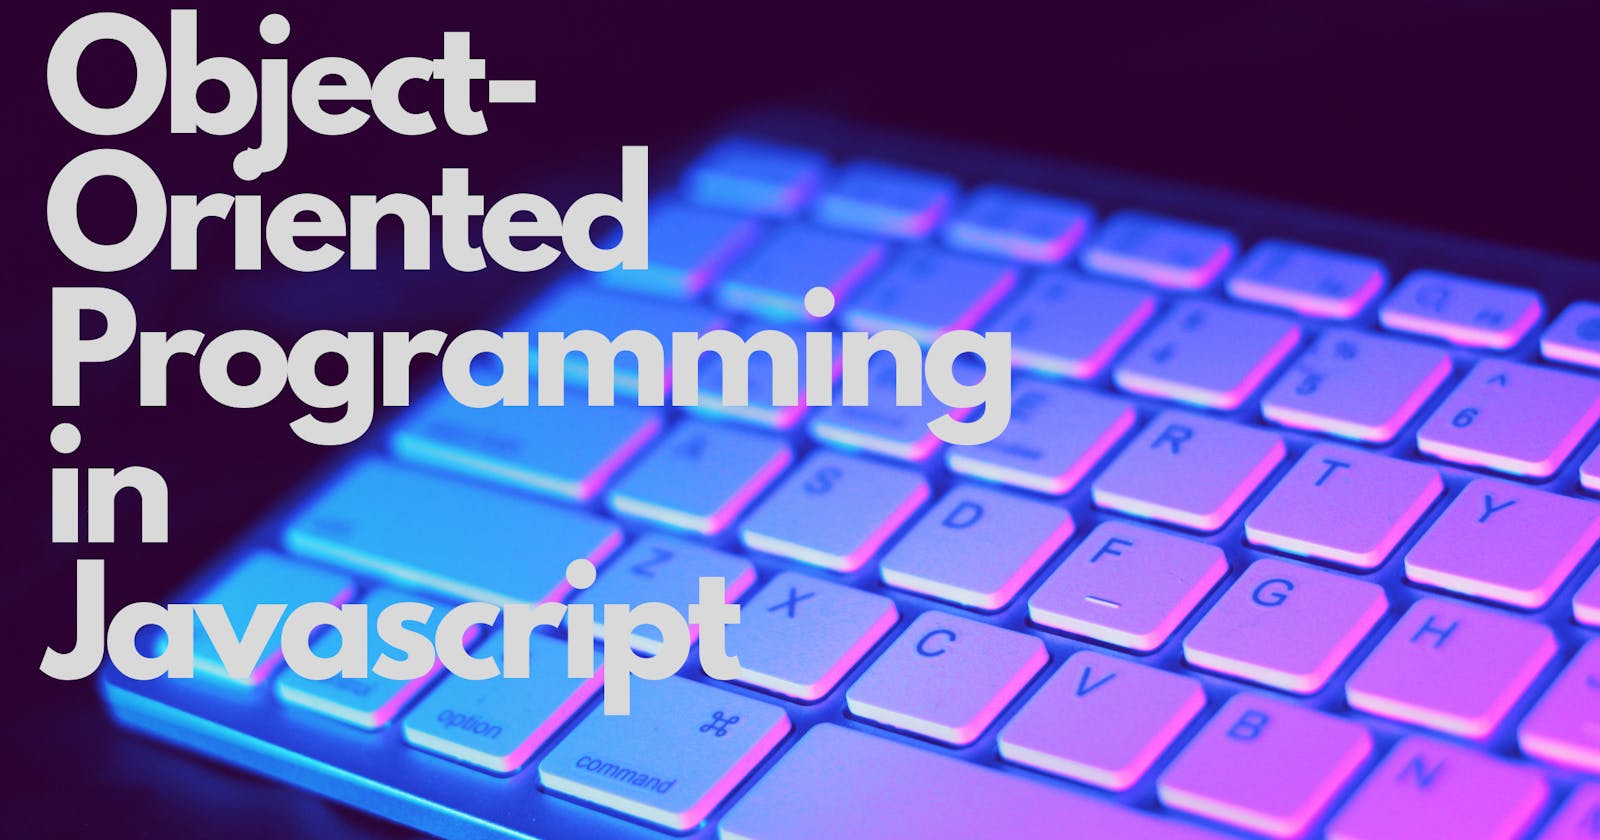 Object-Oriented Programming in Javascript